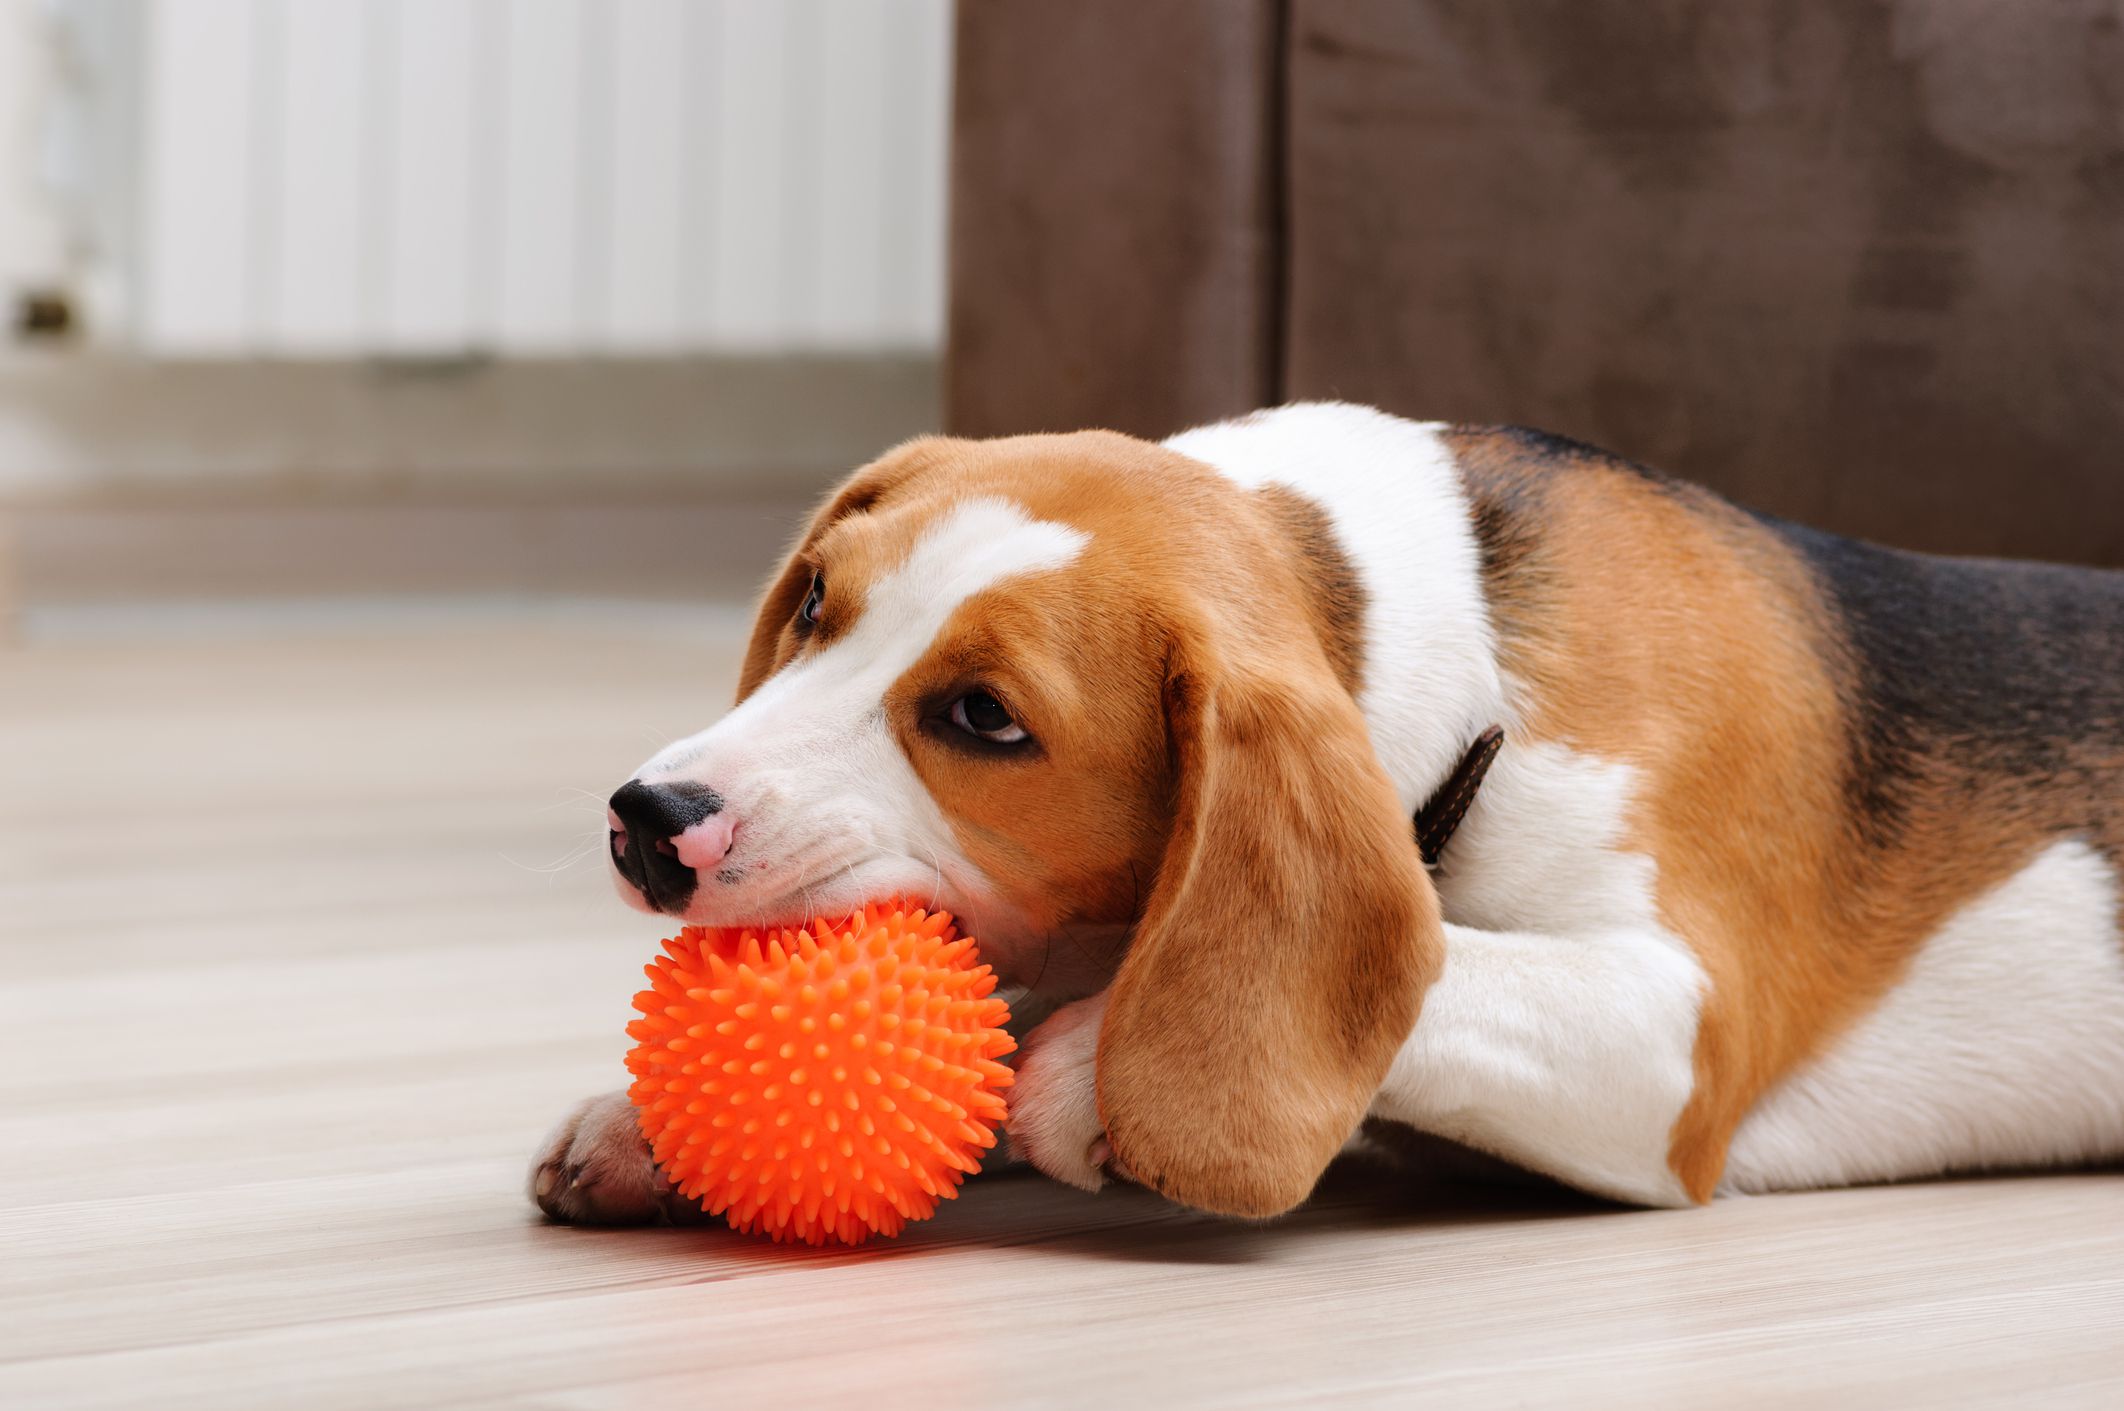 What are the Safety Tips Associated With Squeaky Toys for Dogs?